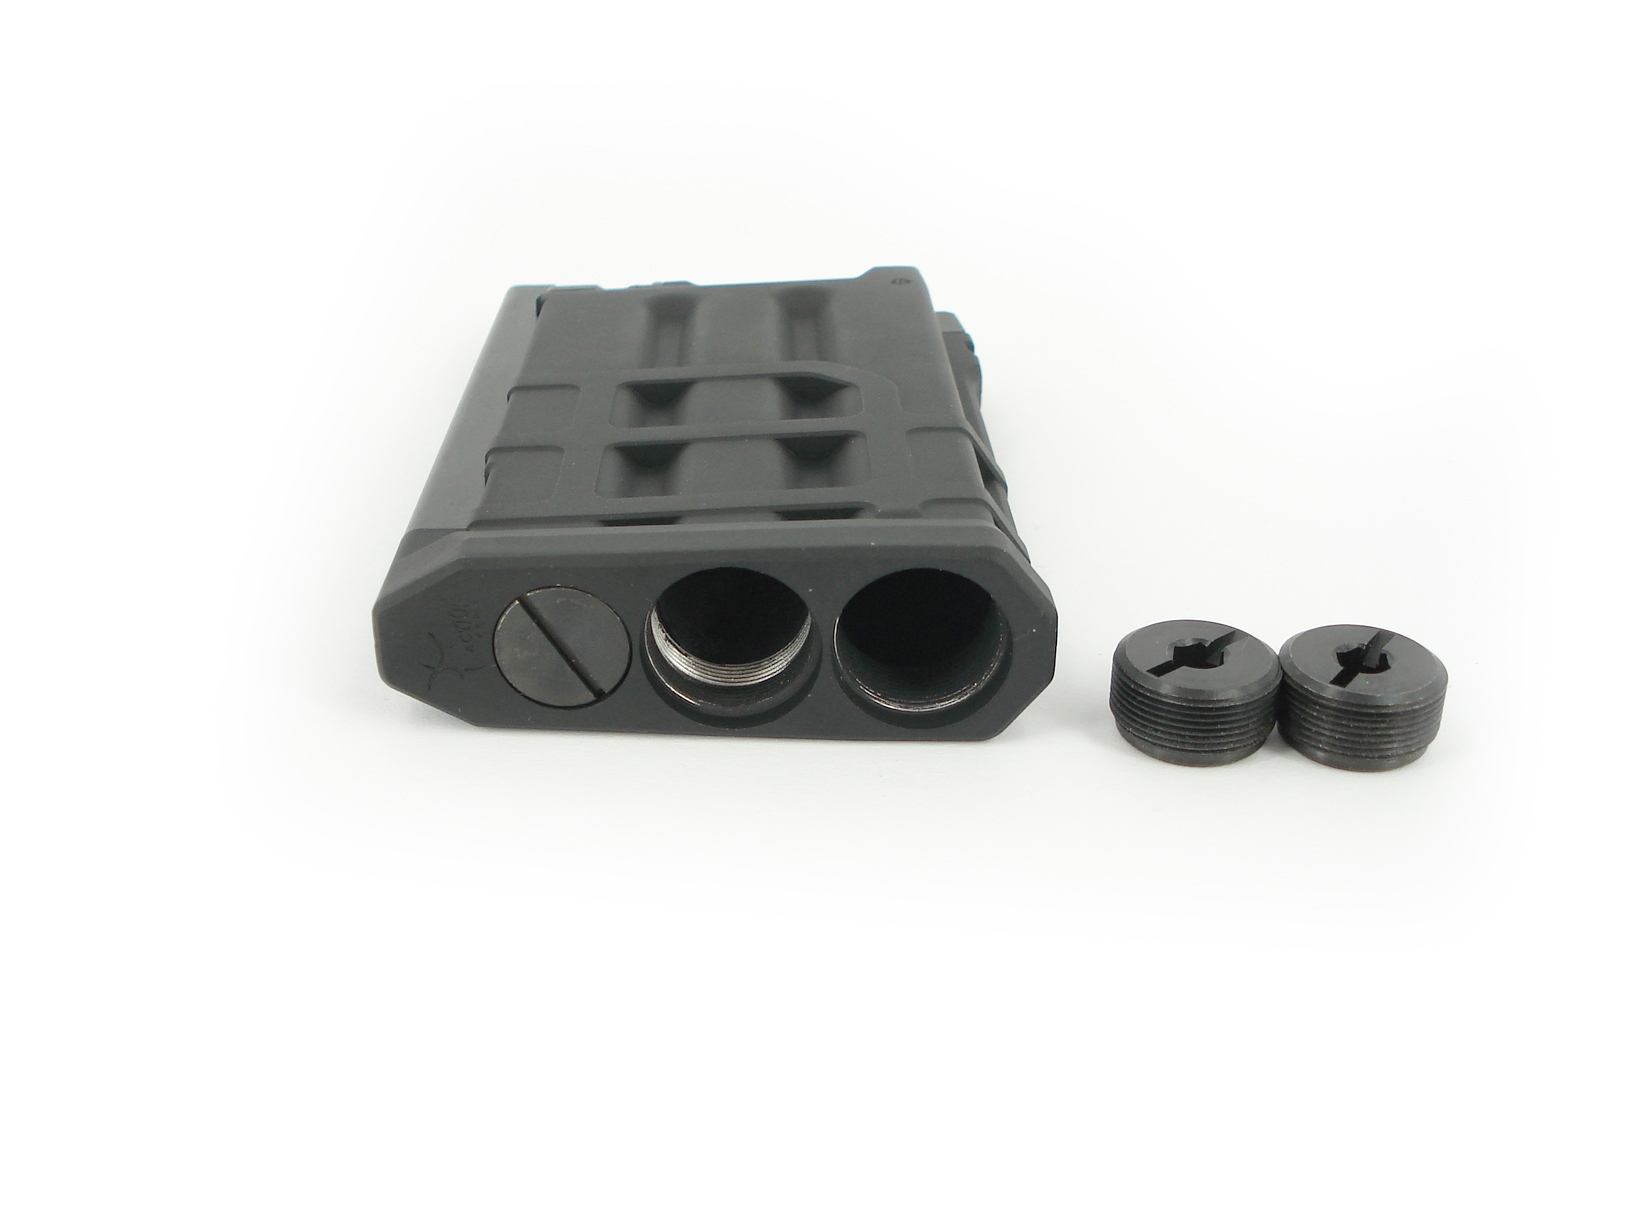 Action Army AAC21/M700 CO2 Magazine